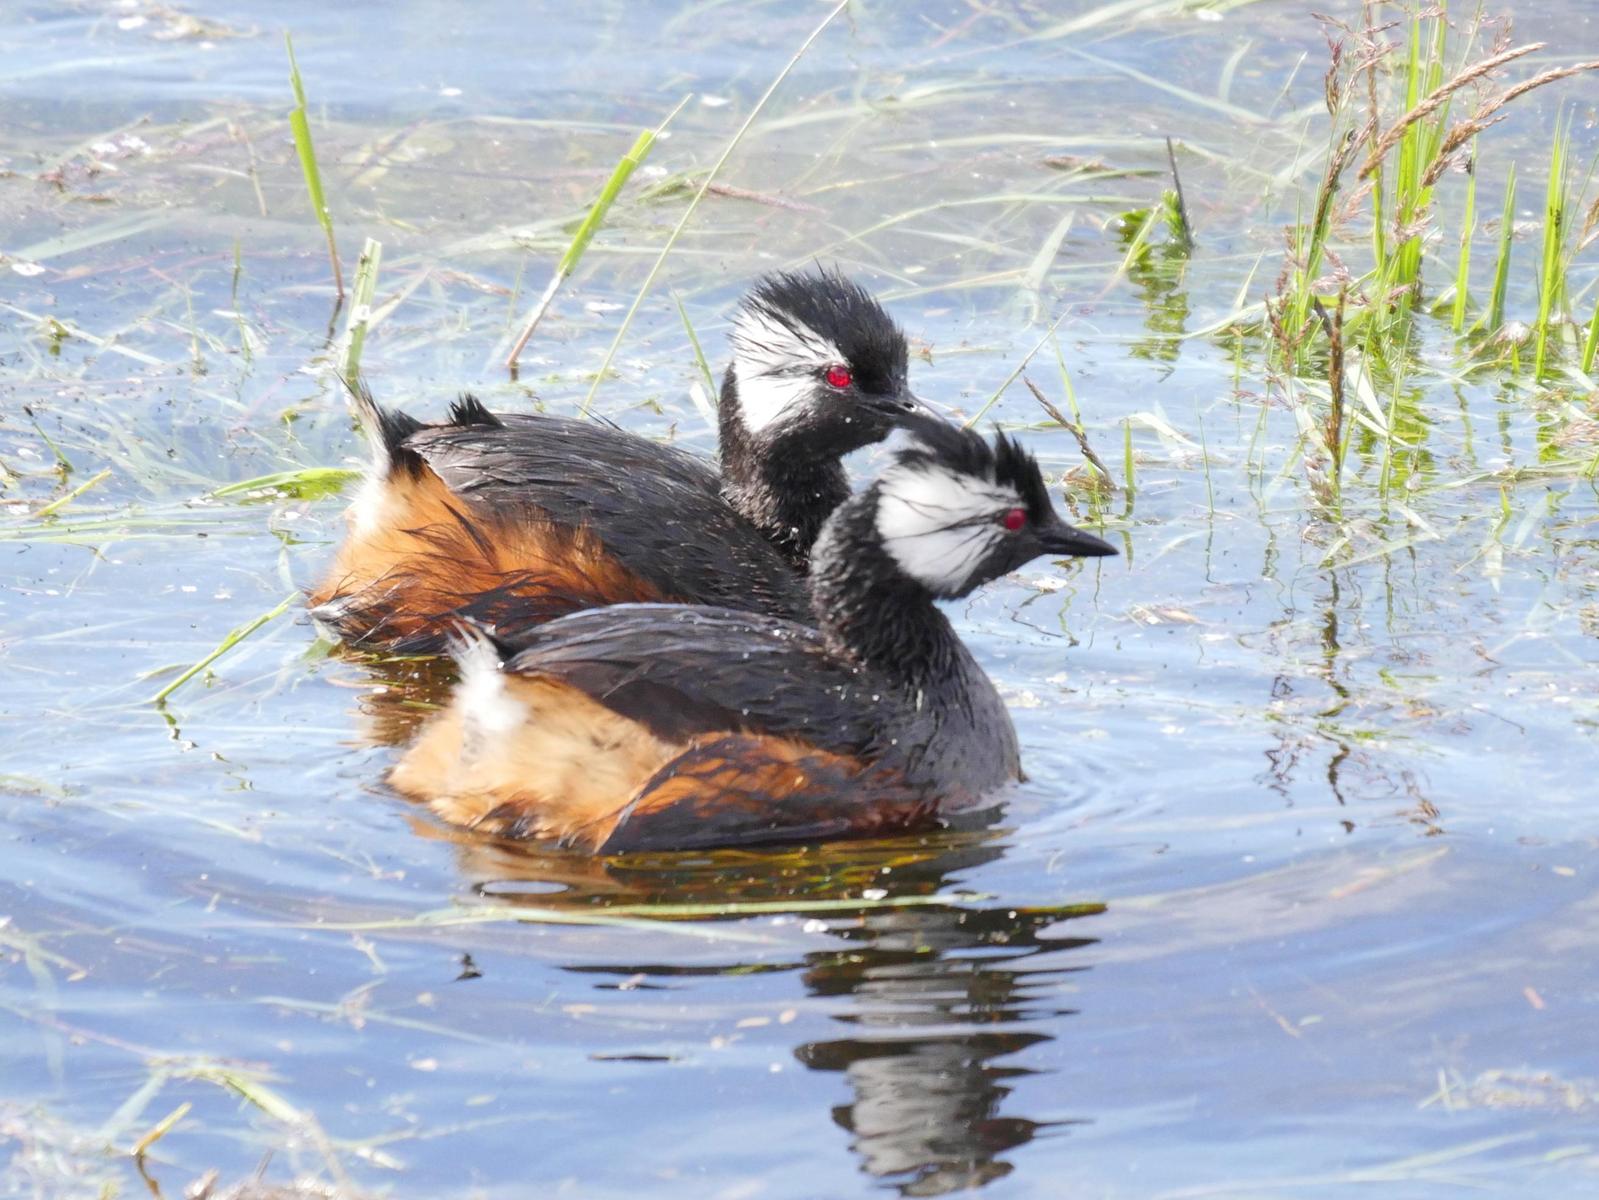 White-tufted Grebe Photo by Peter Lowe